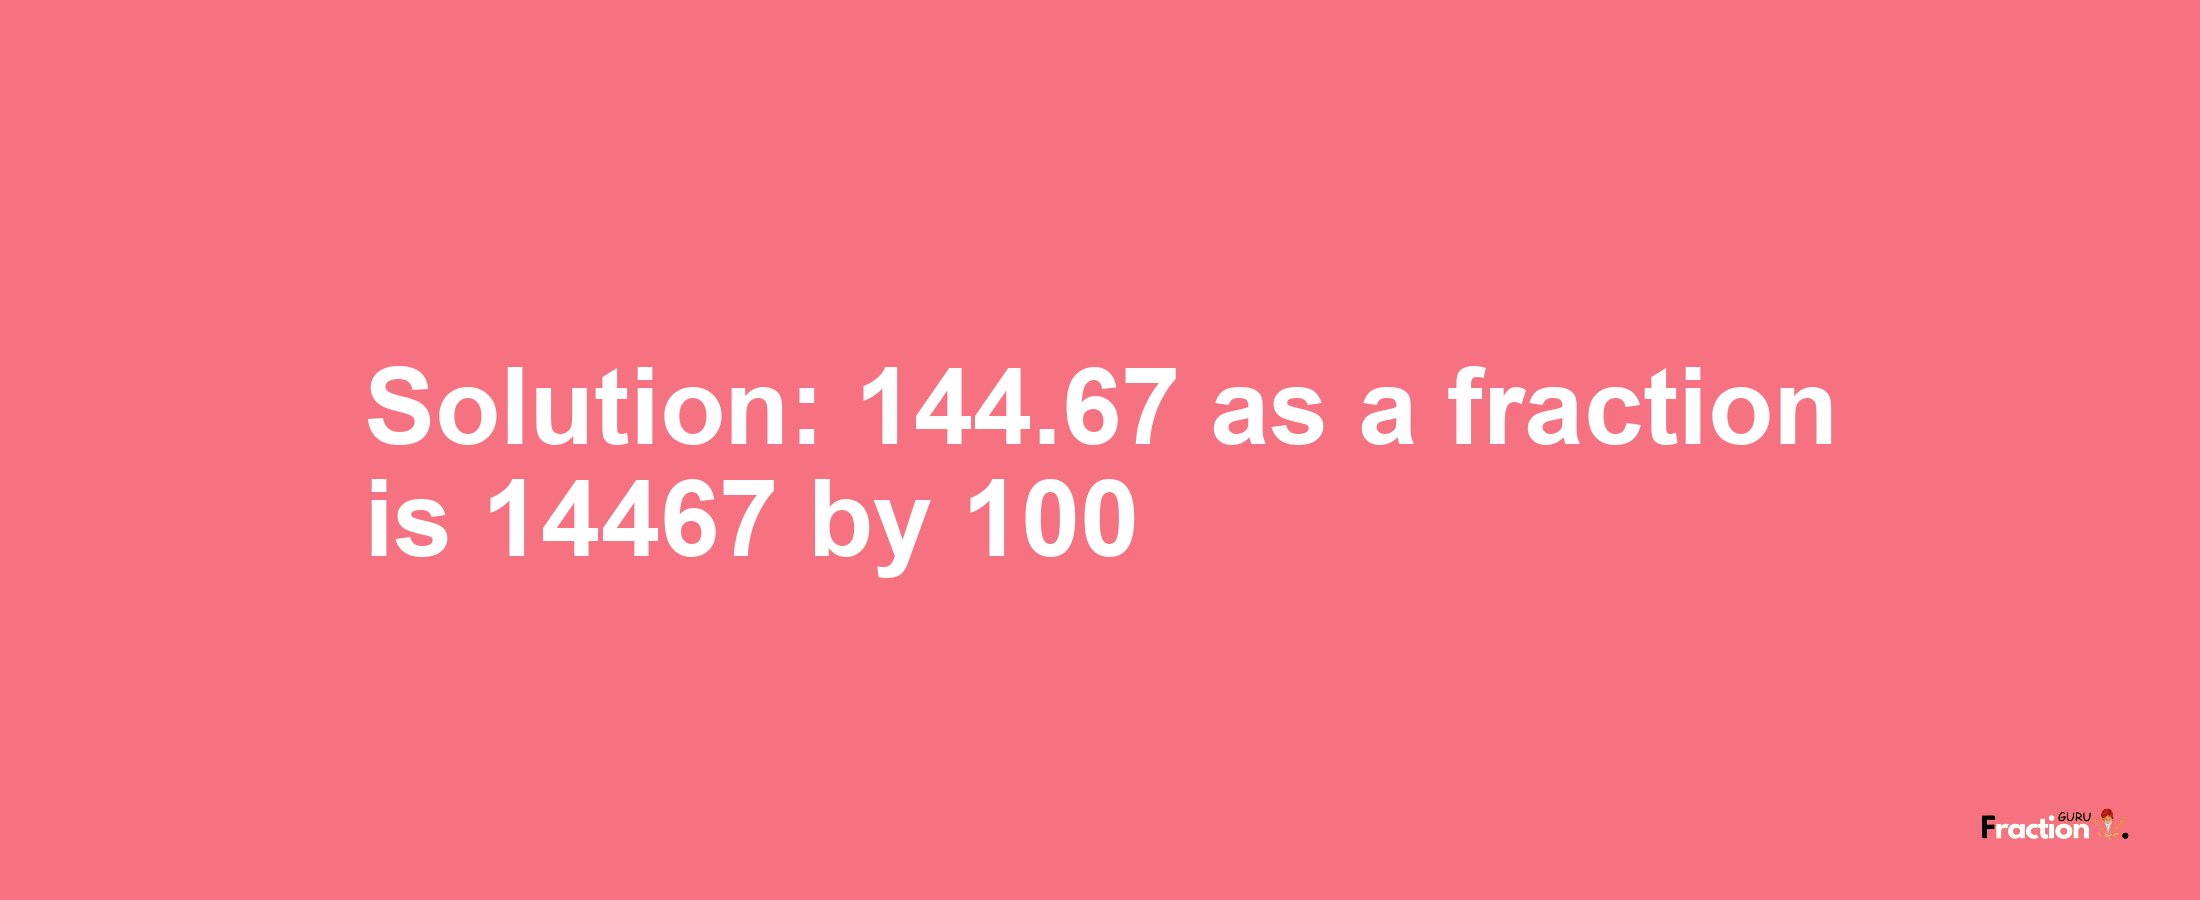 Solution:144.67 as a fraction is 14467/100